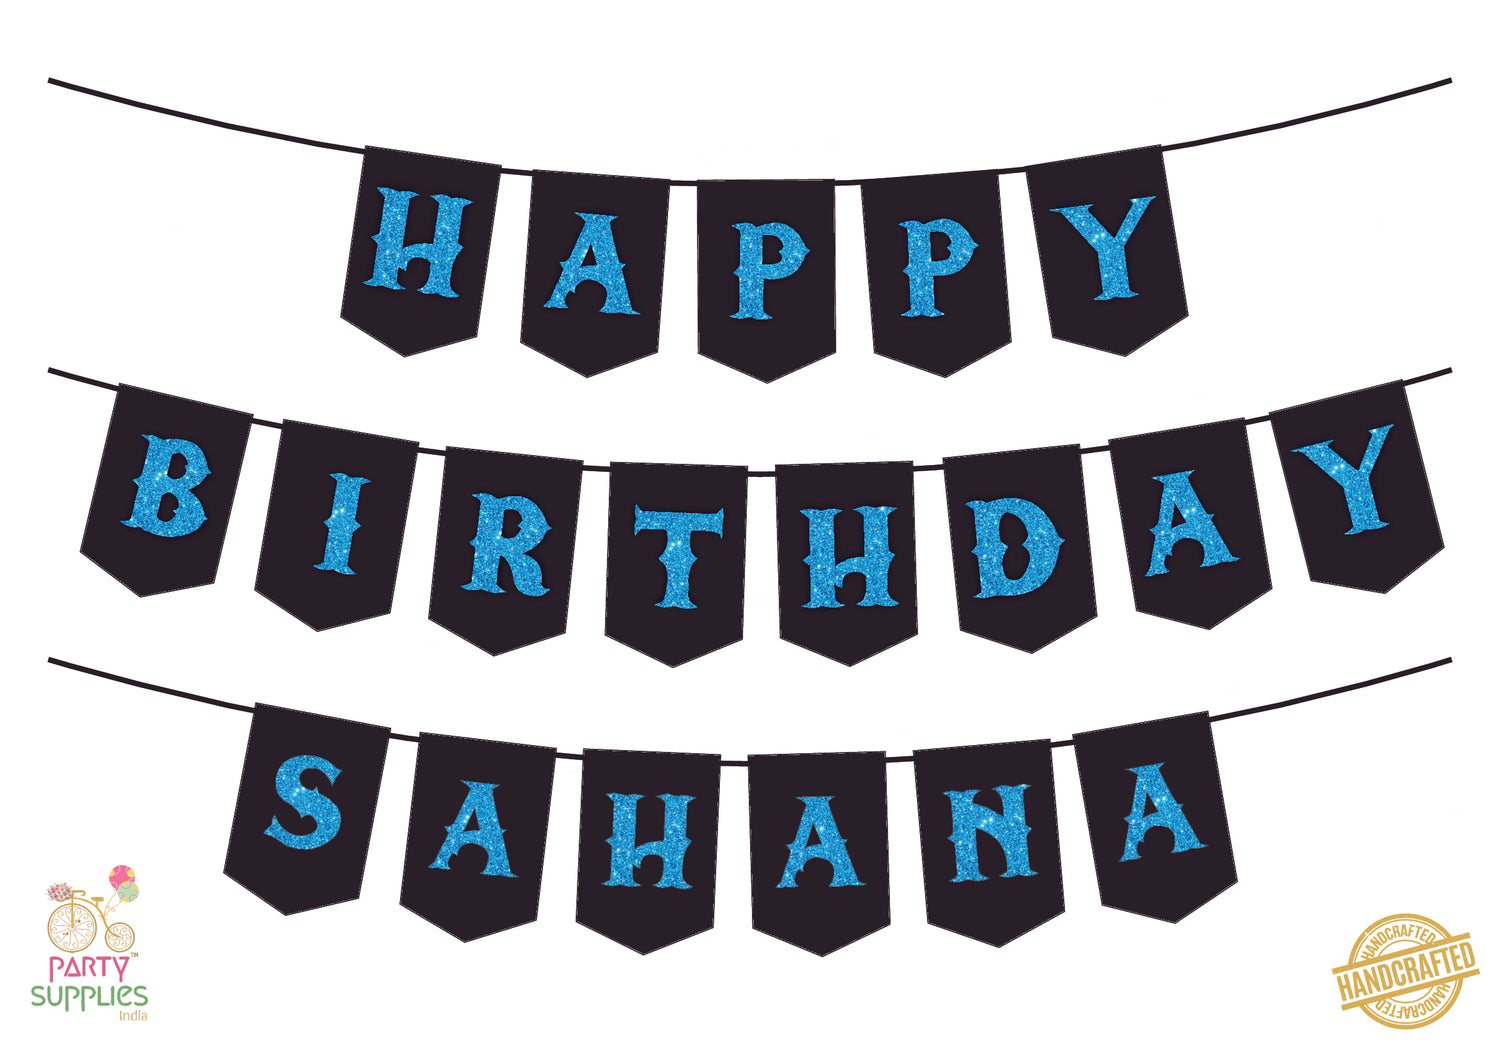 Hand Crafted Black with Sky Blue Happy Birthday Bunting